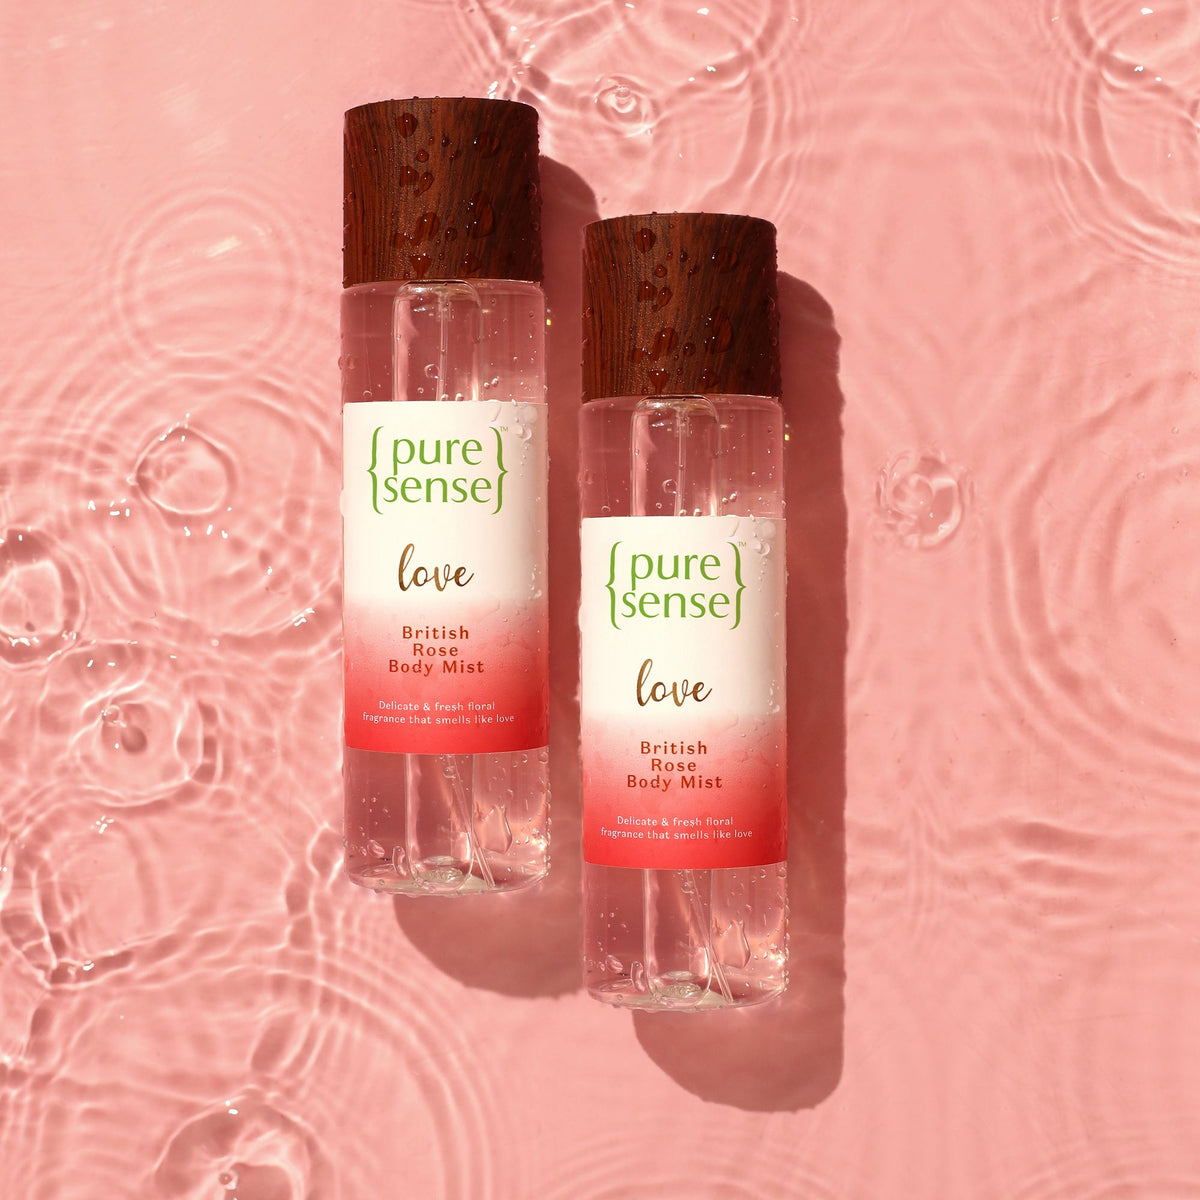 [JIO] Love British Rose Body Mist (Pack of 2) | From the makers of Parachute Advansed | 300ml